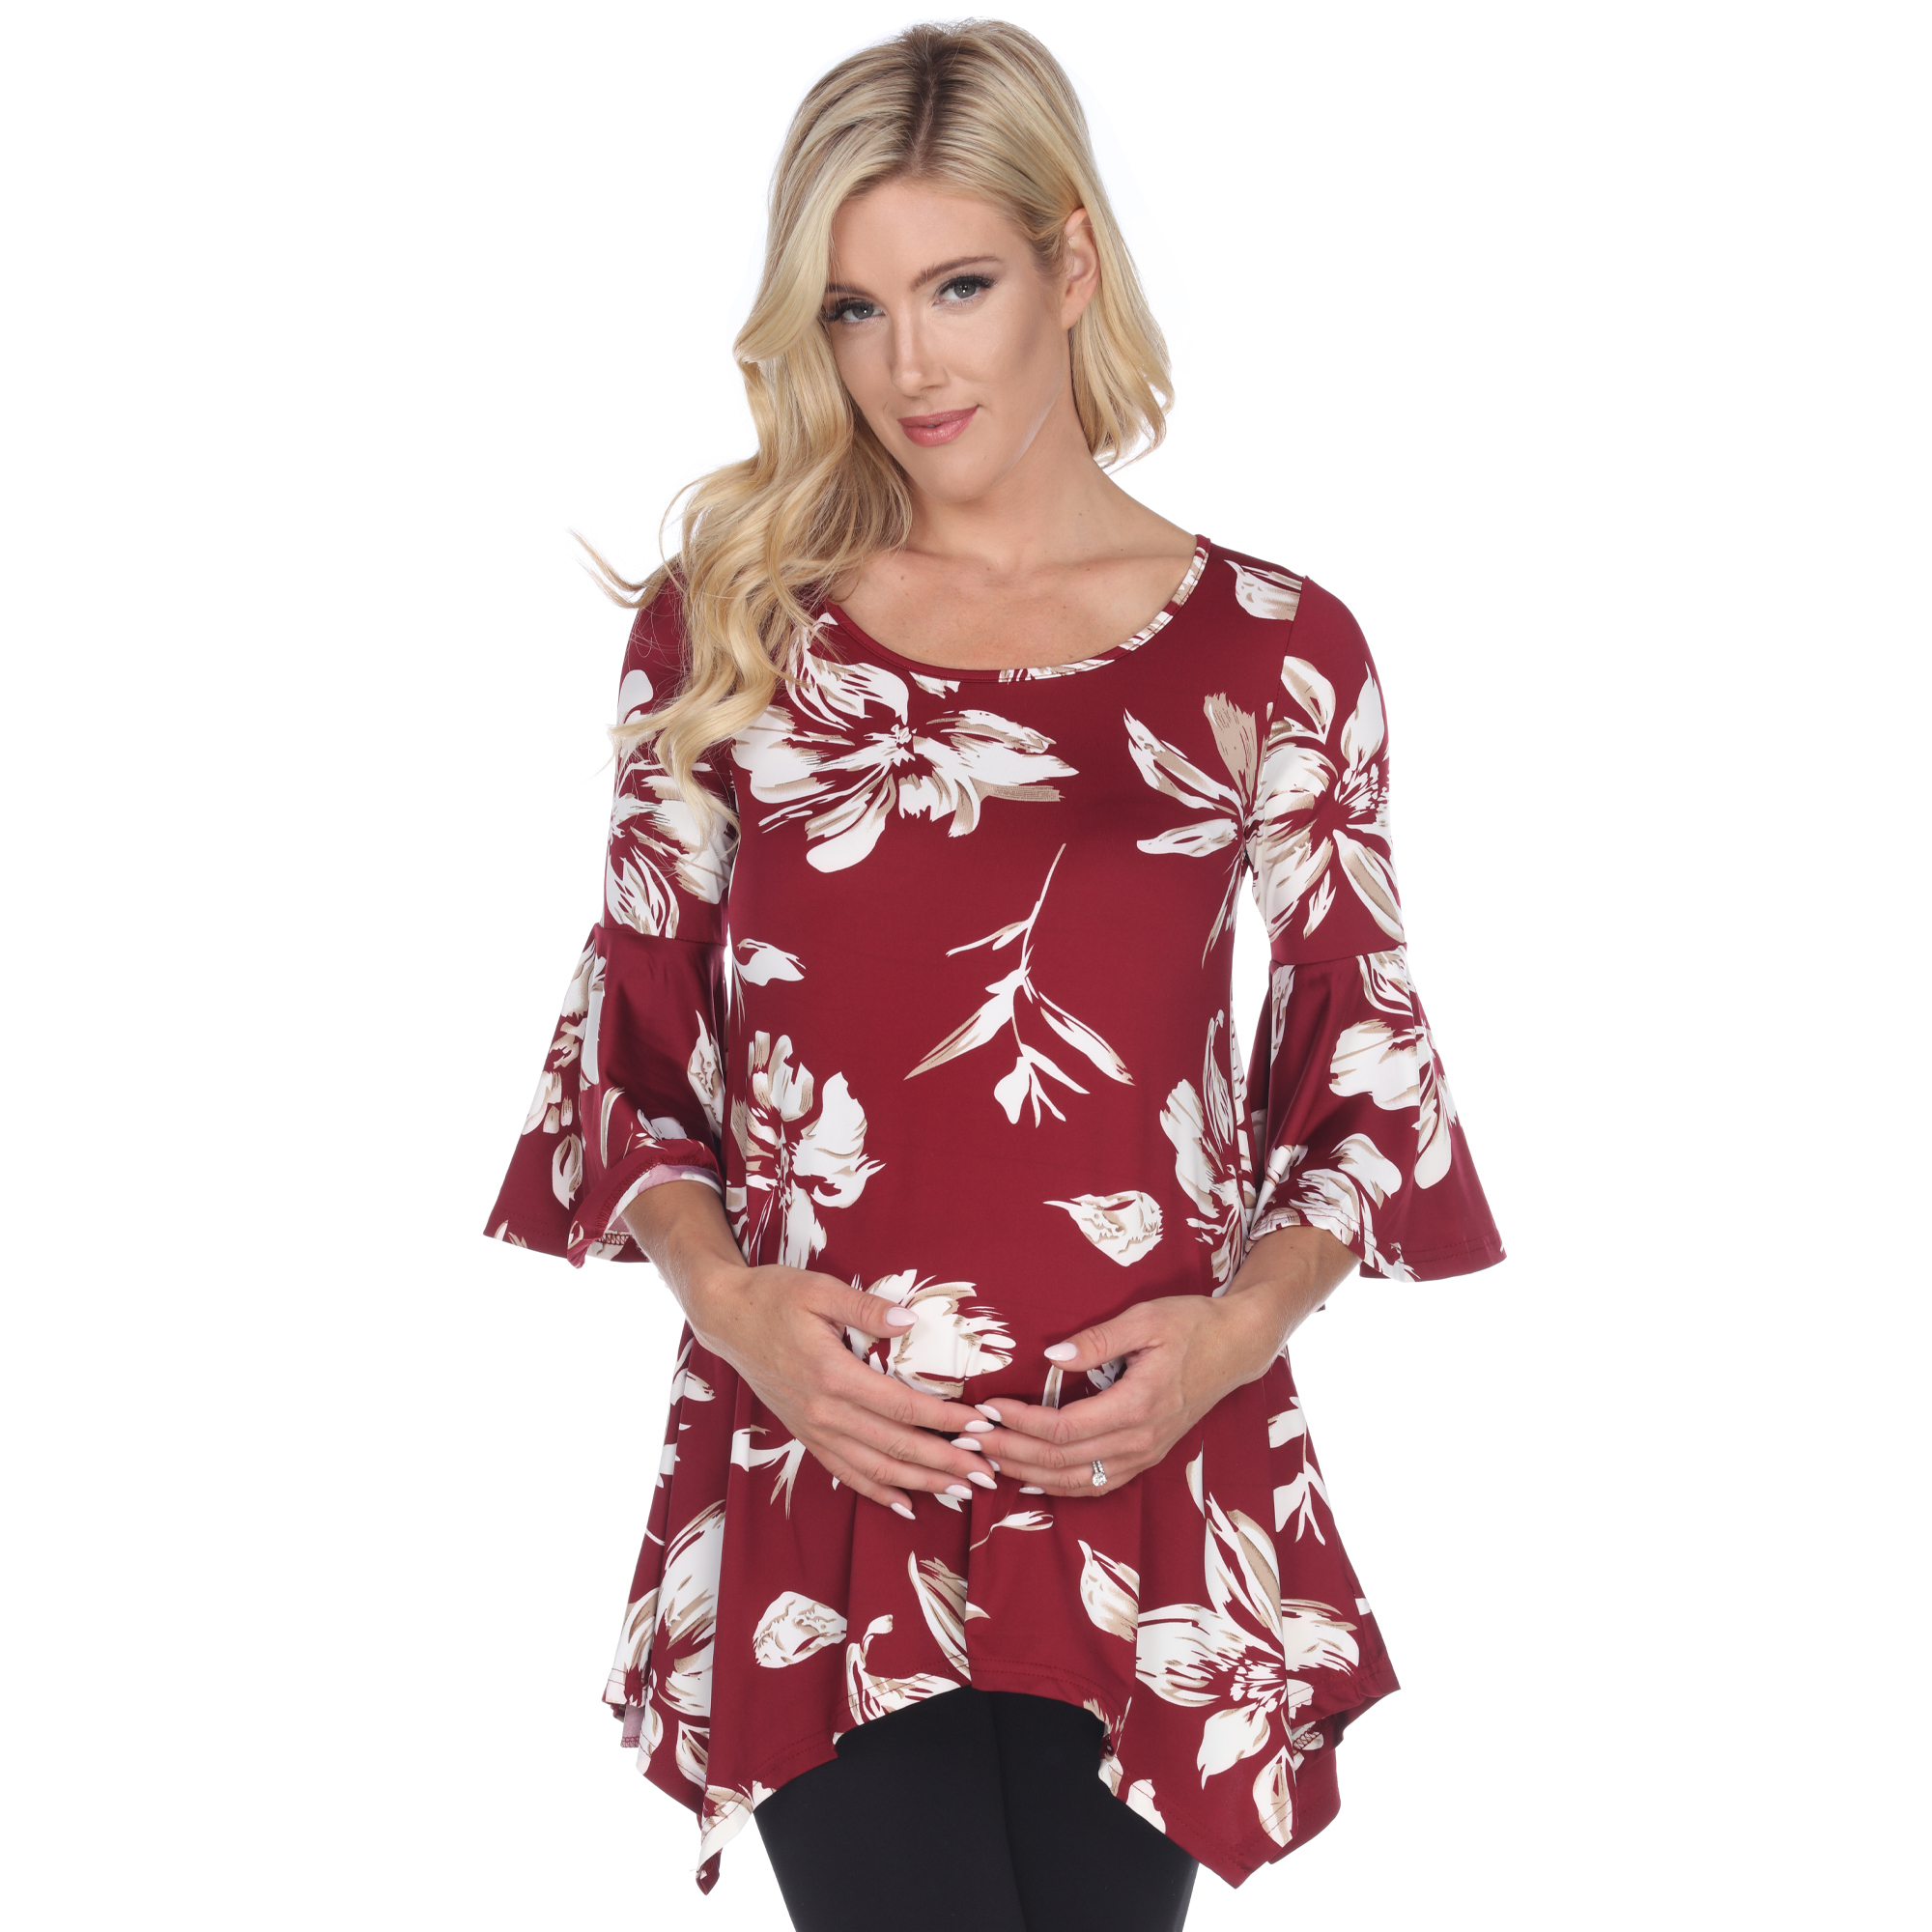 White Mark Women's Maternity Floral Print Quarter Sleeve Tunic Top With Pockets - Red, Small